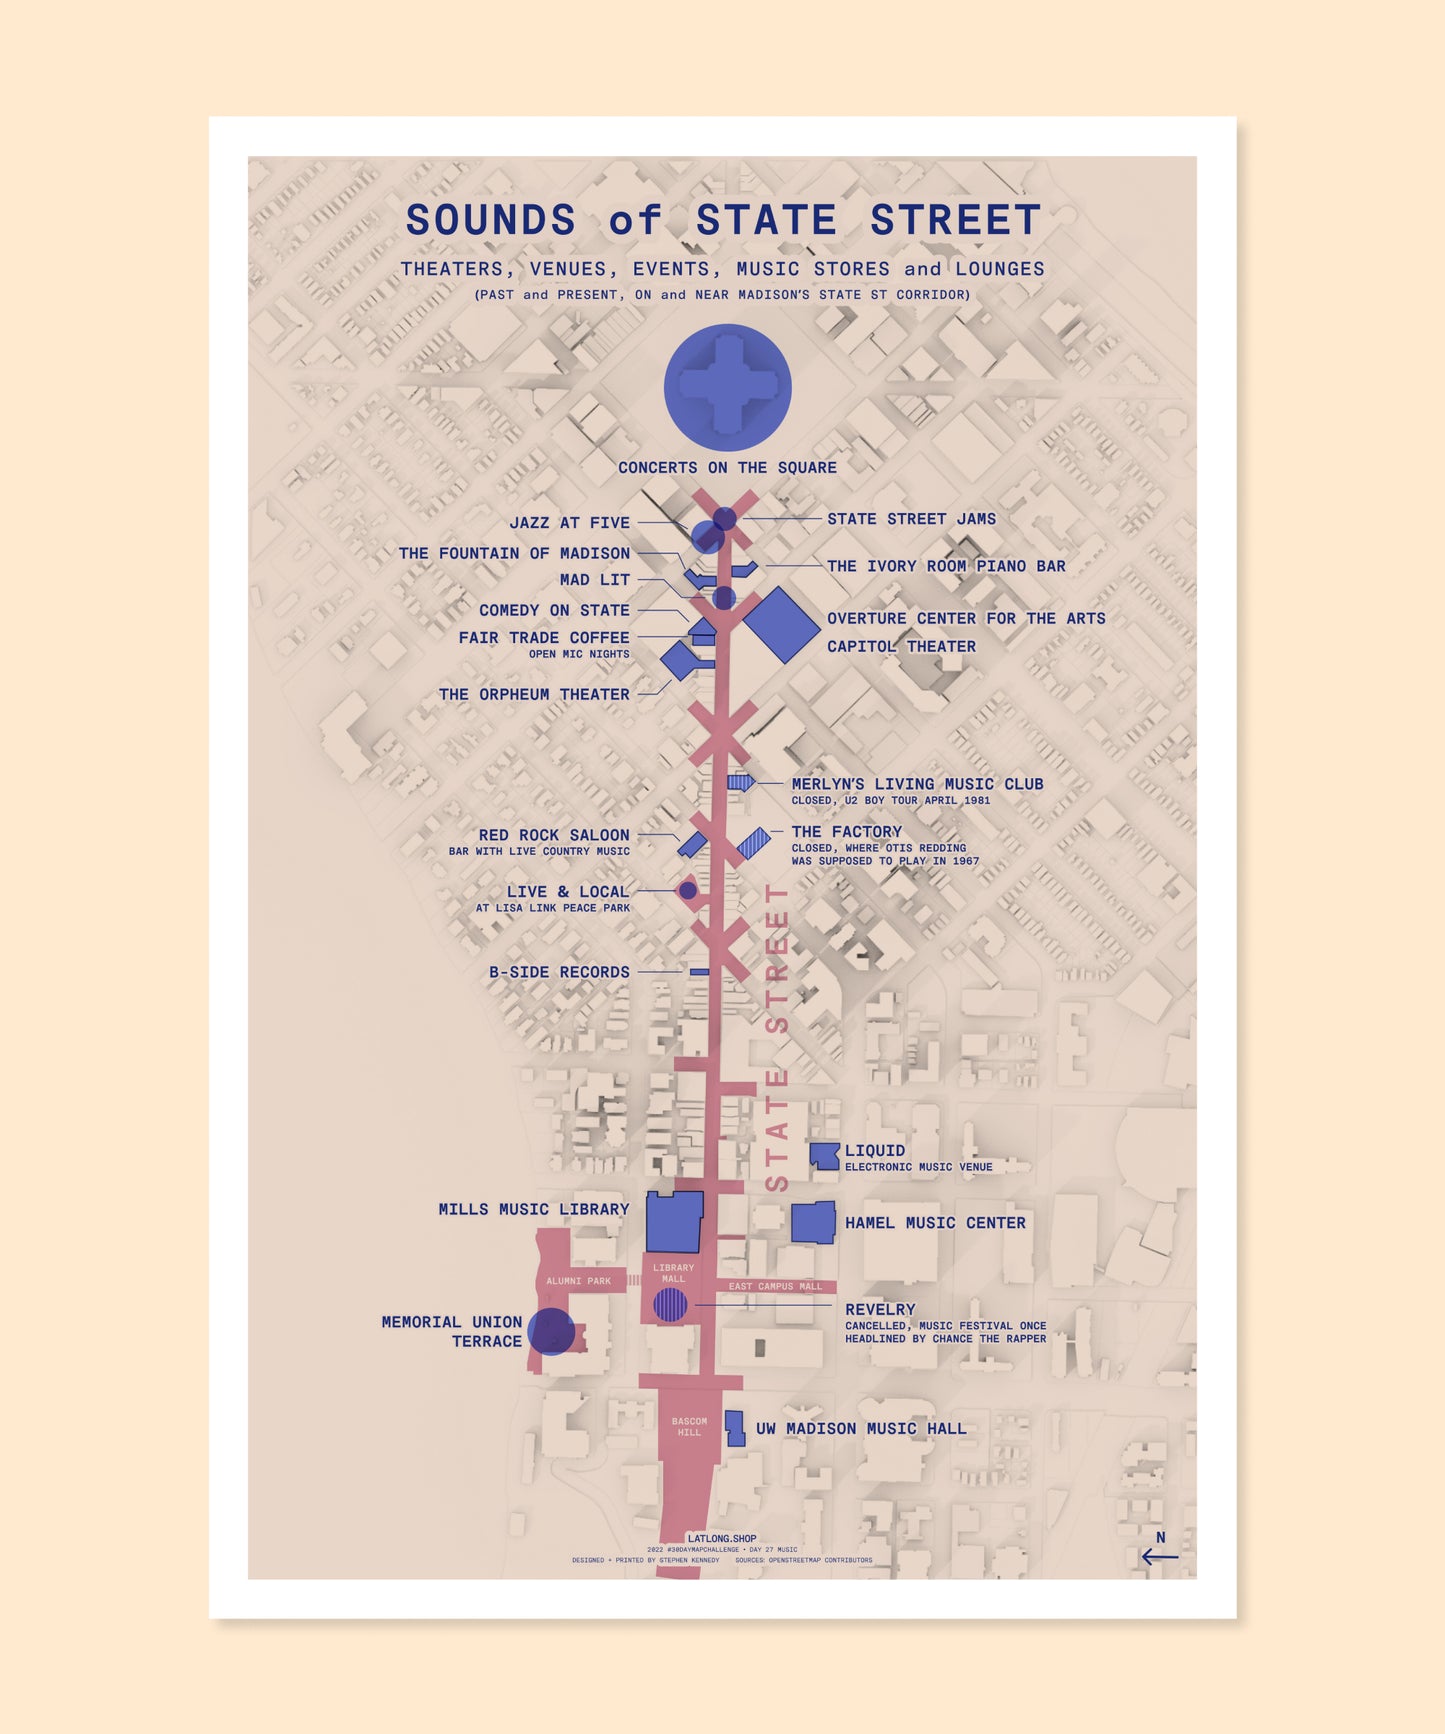 Sounds of State Street